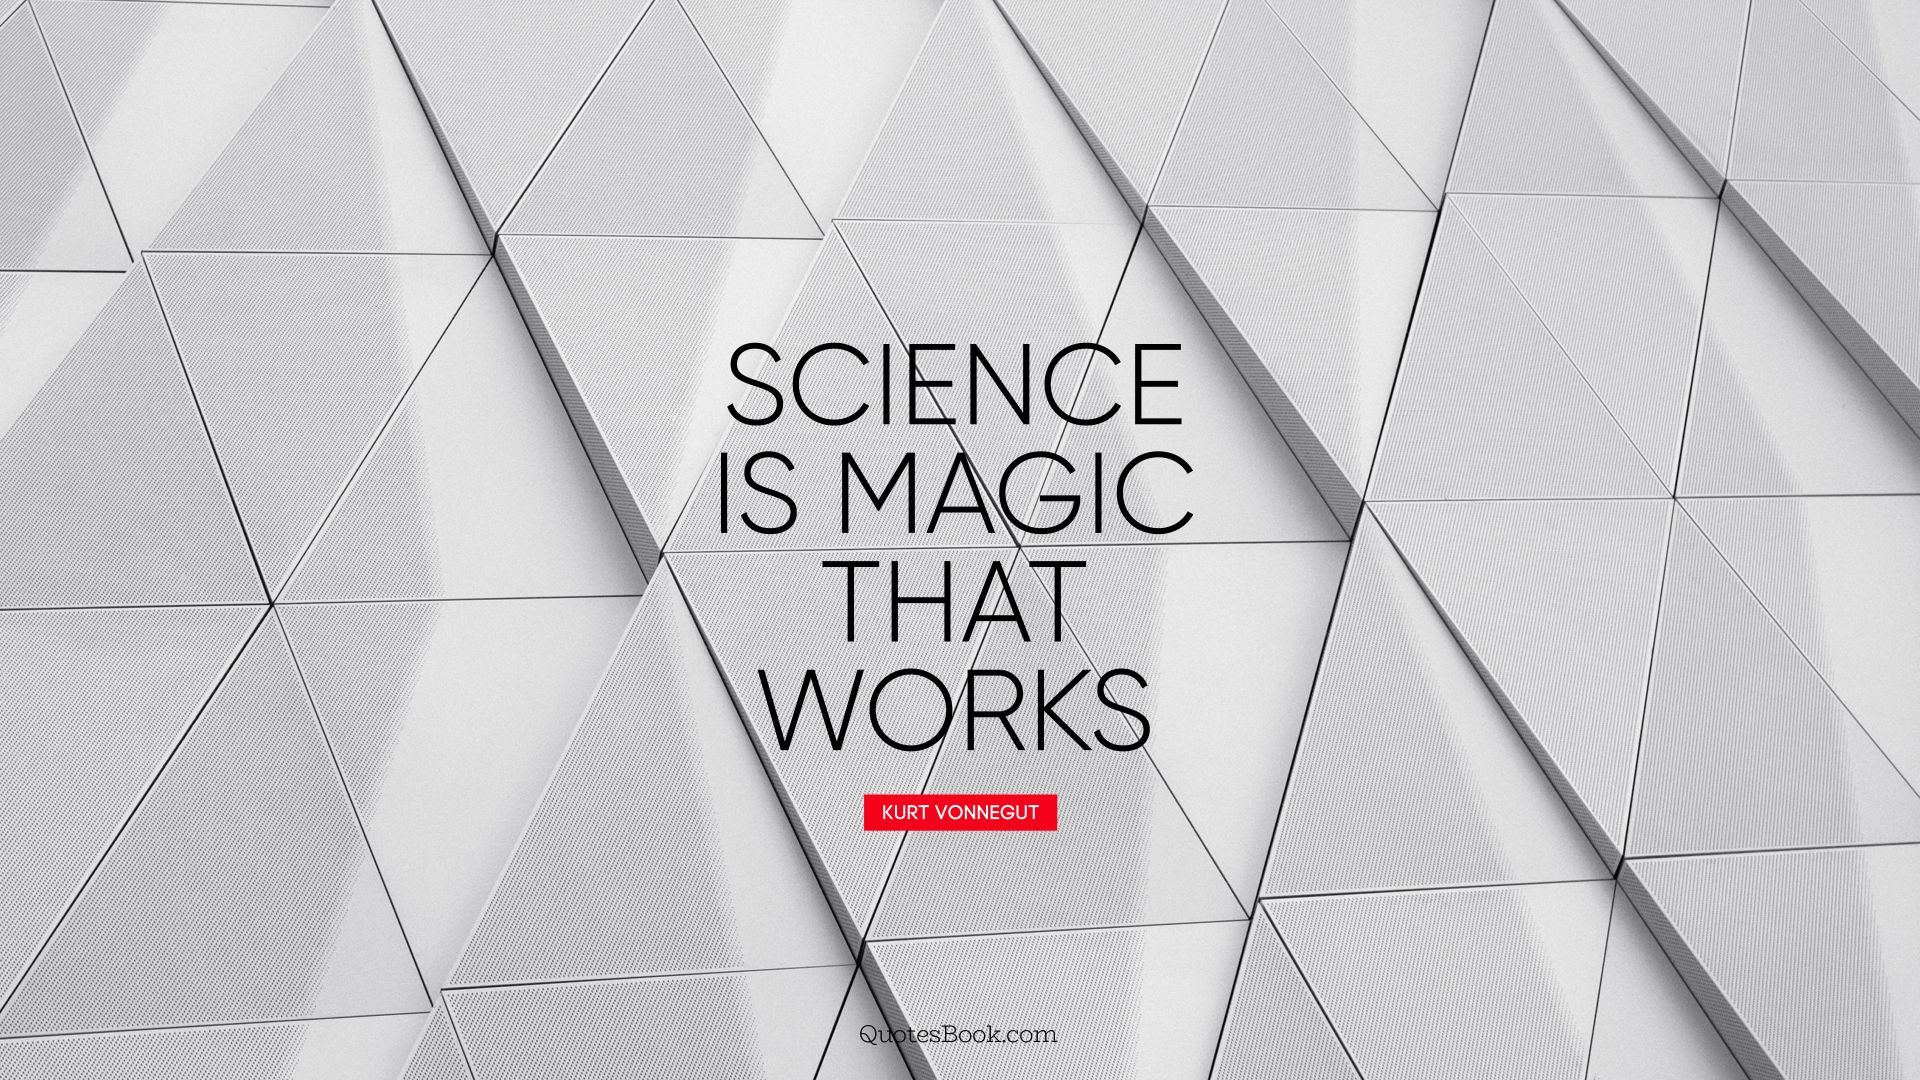 Science is magic that works. - Quote by Kurt Vonnegut